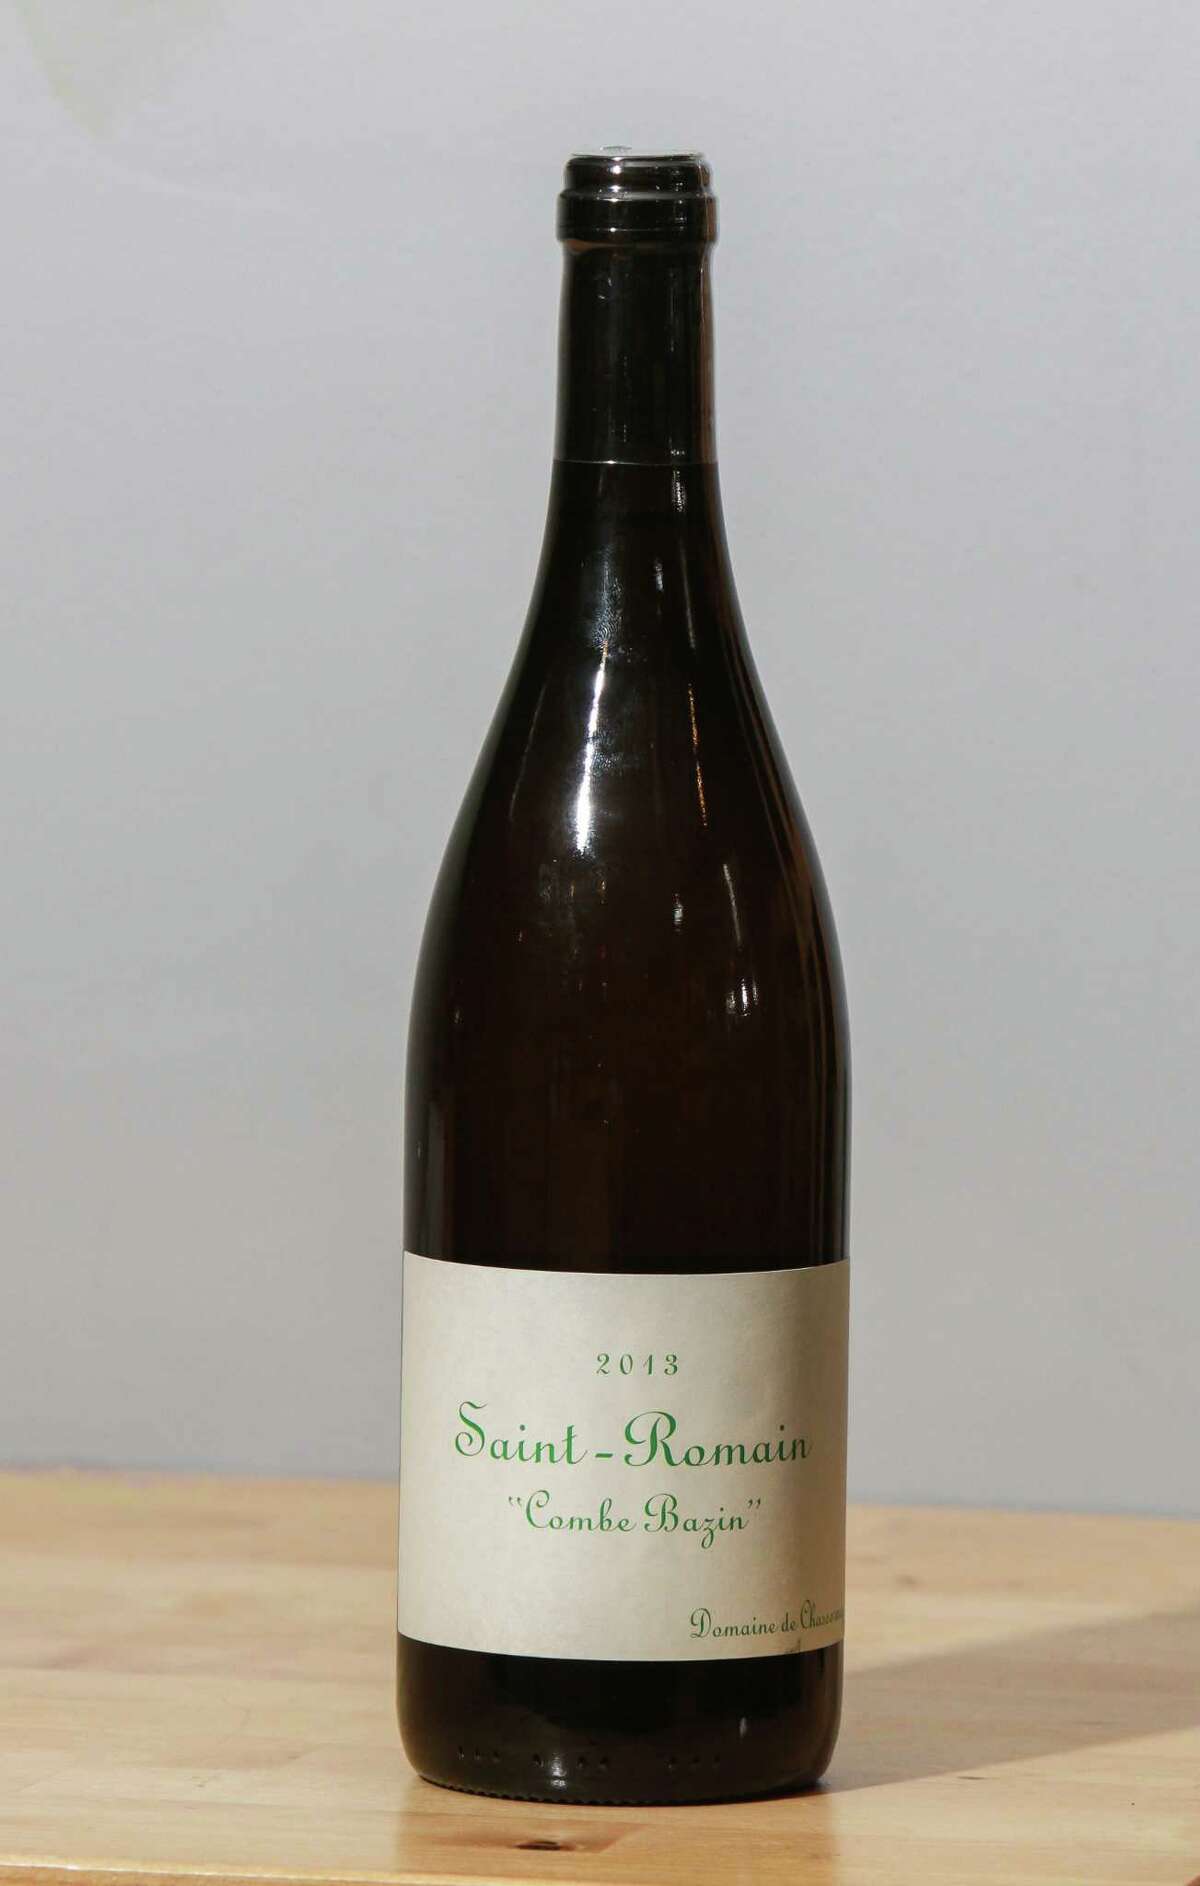 Domaine de Chassorney 2013 Saint-Romain "Combe Bazin," the wine of choice for Thomas MoÃ©«sse, wine director at Vinology. (For the Chronicle/Gary Fountain, February 7, 2018)